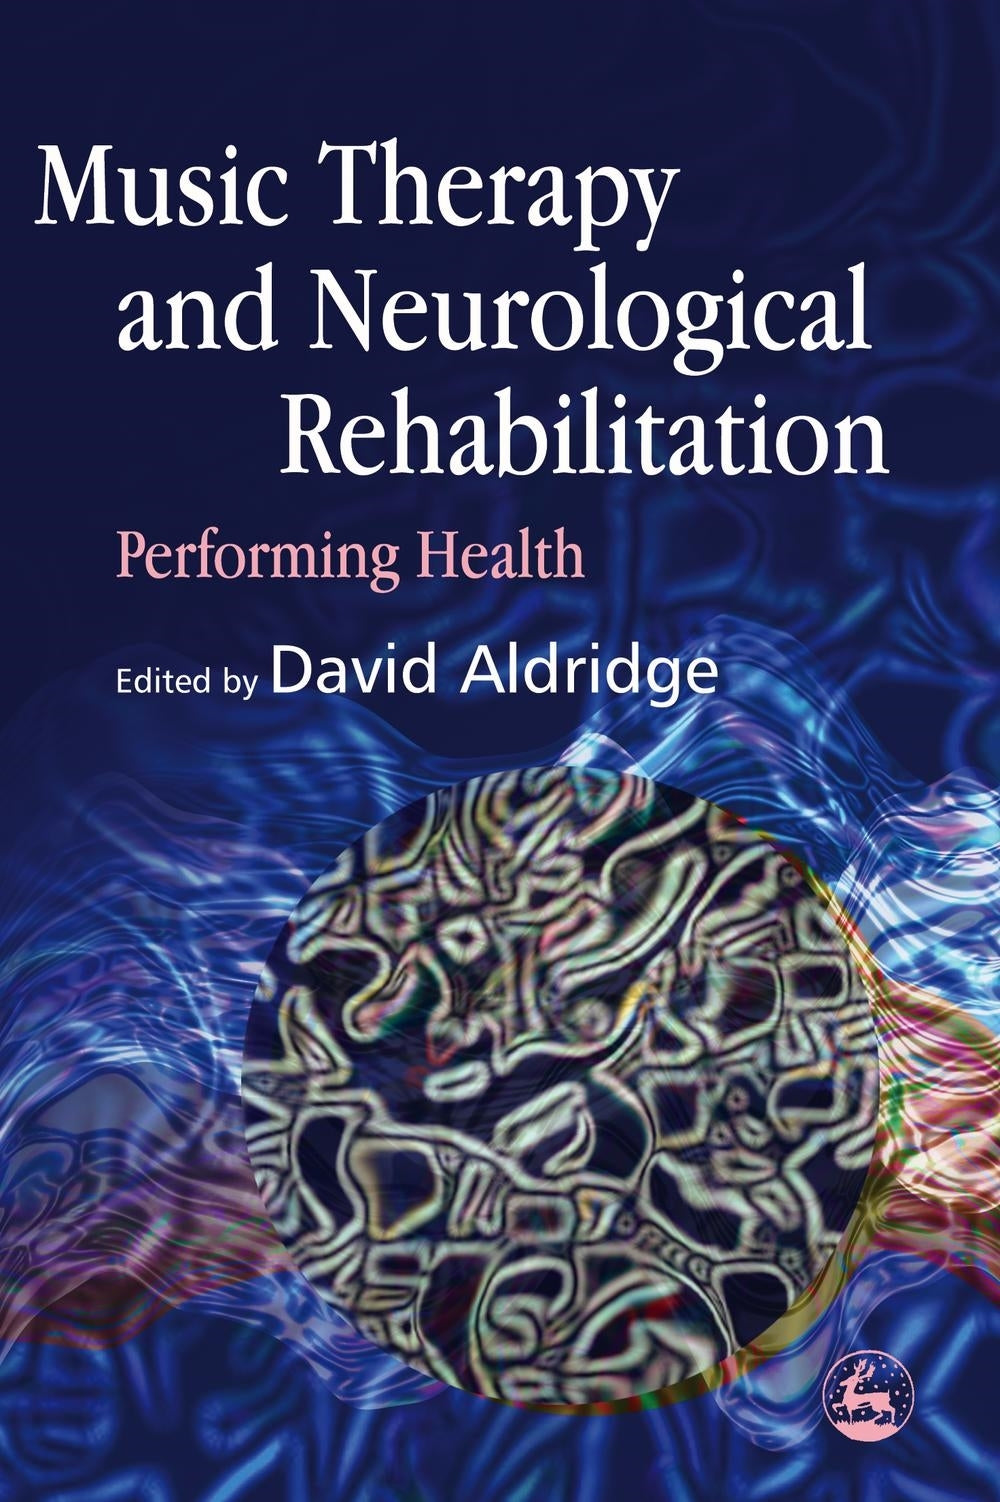 Music Therapy and Neurological Rehabilitation by David Aldridge, No Author Listed